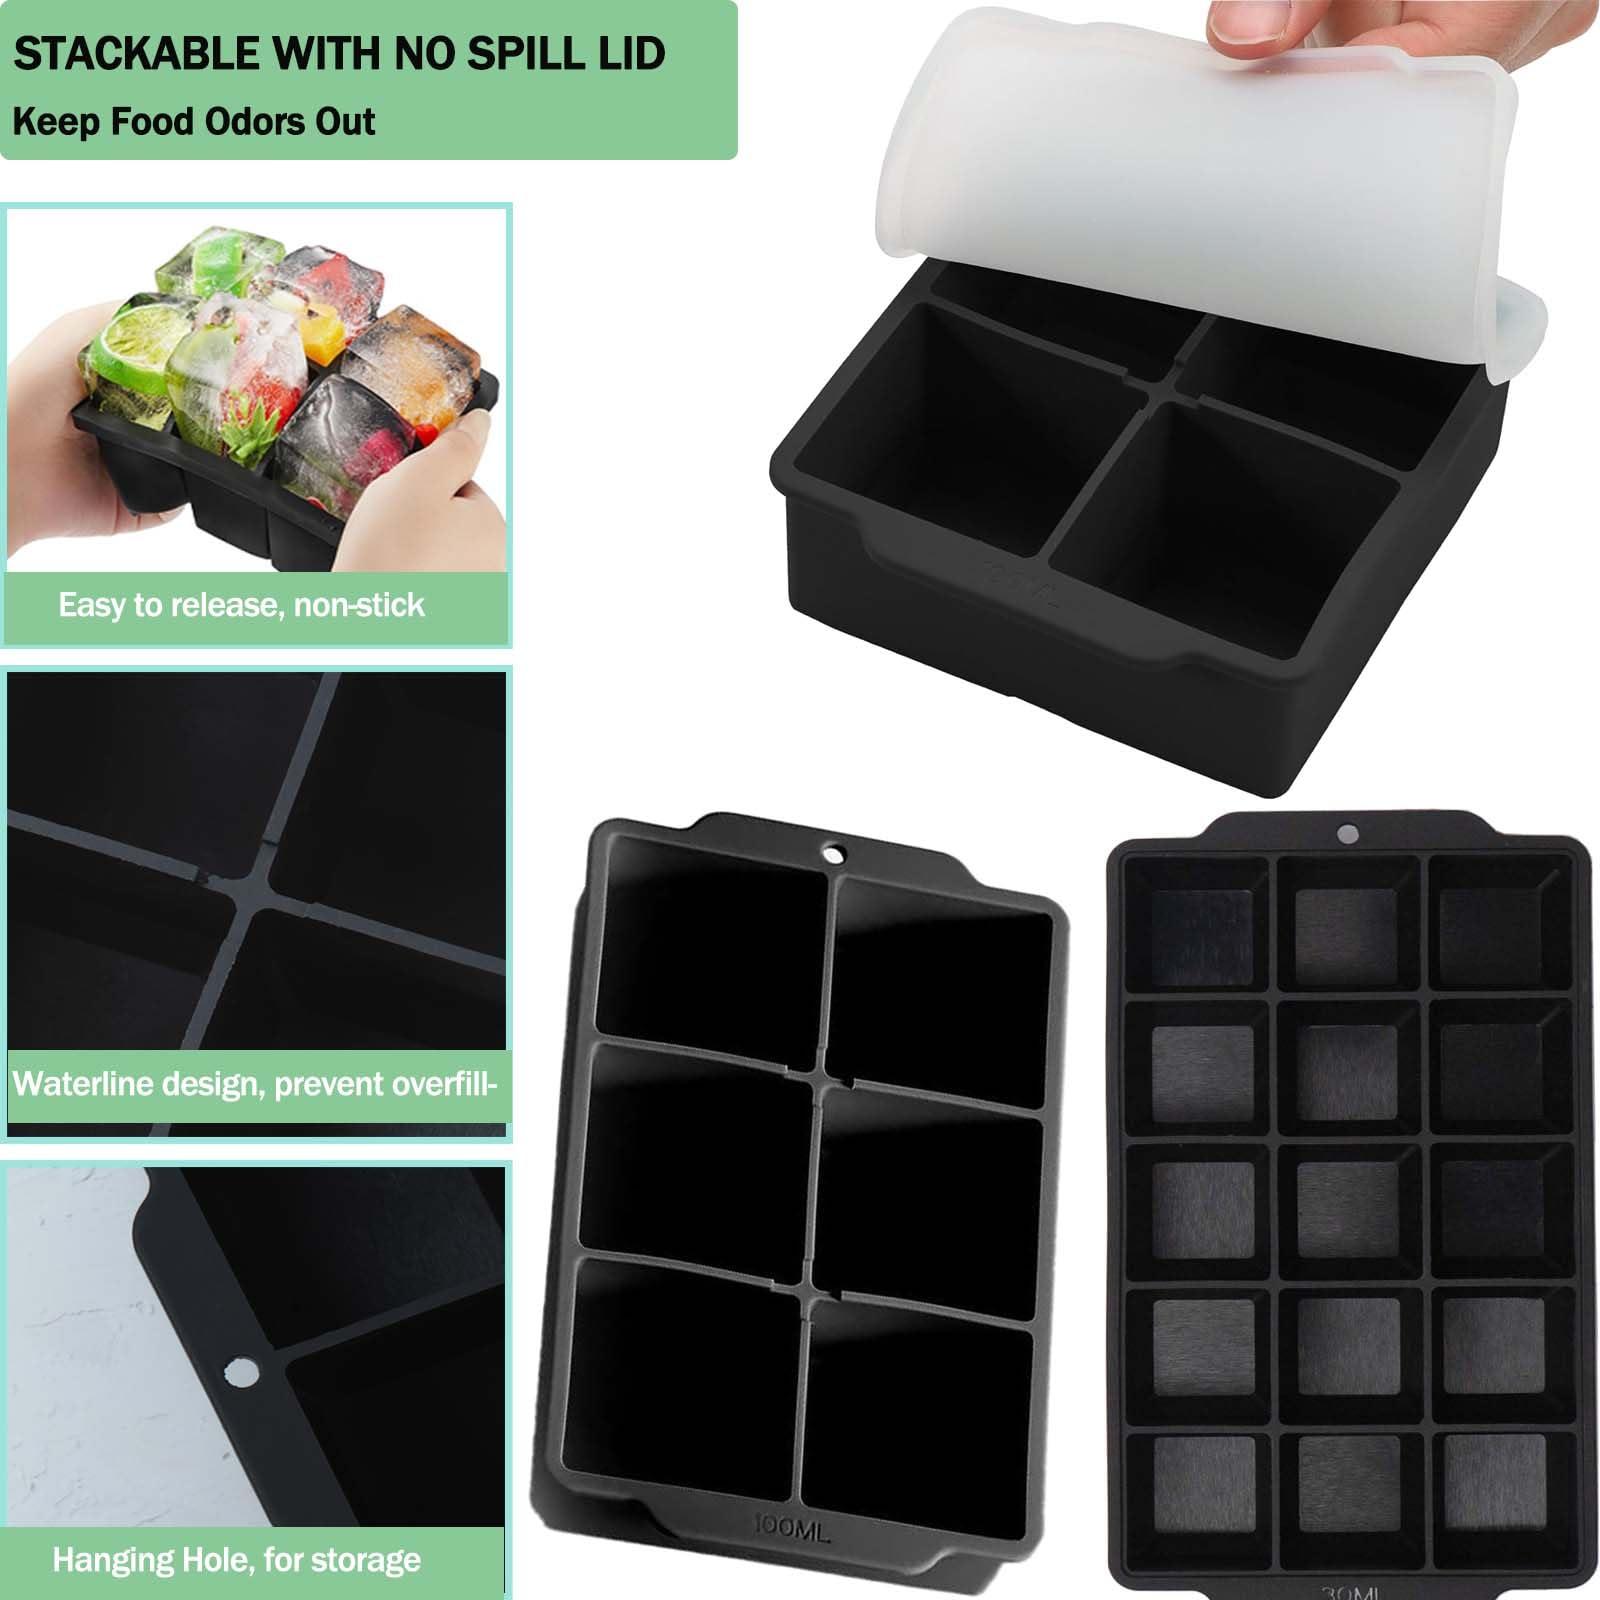 Silicone ice cube tray for 6 ice cubes